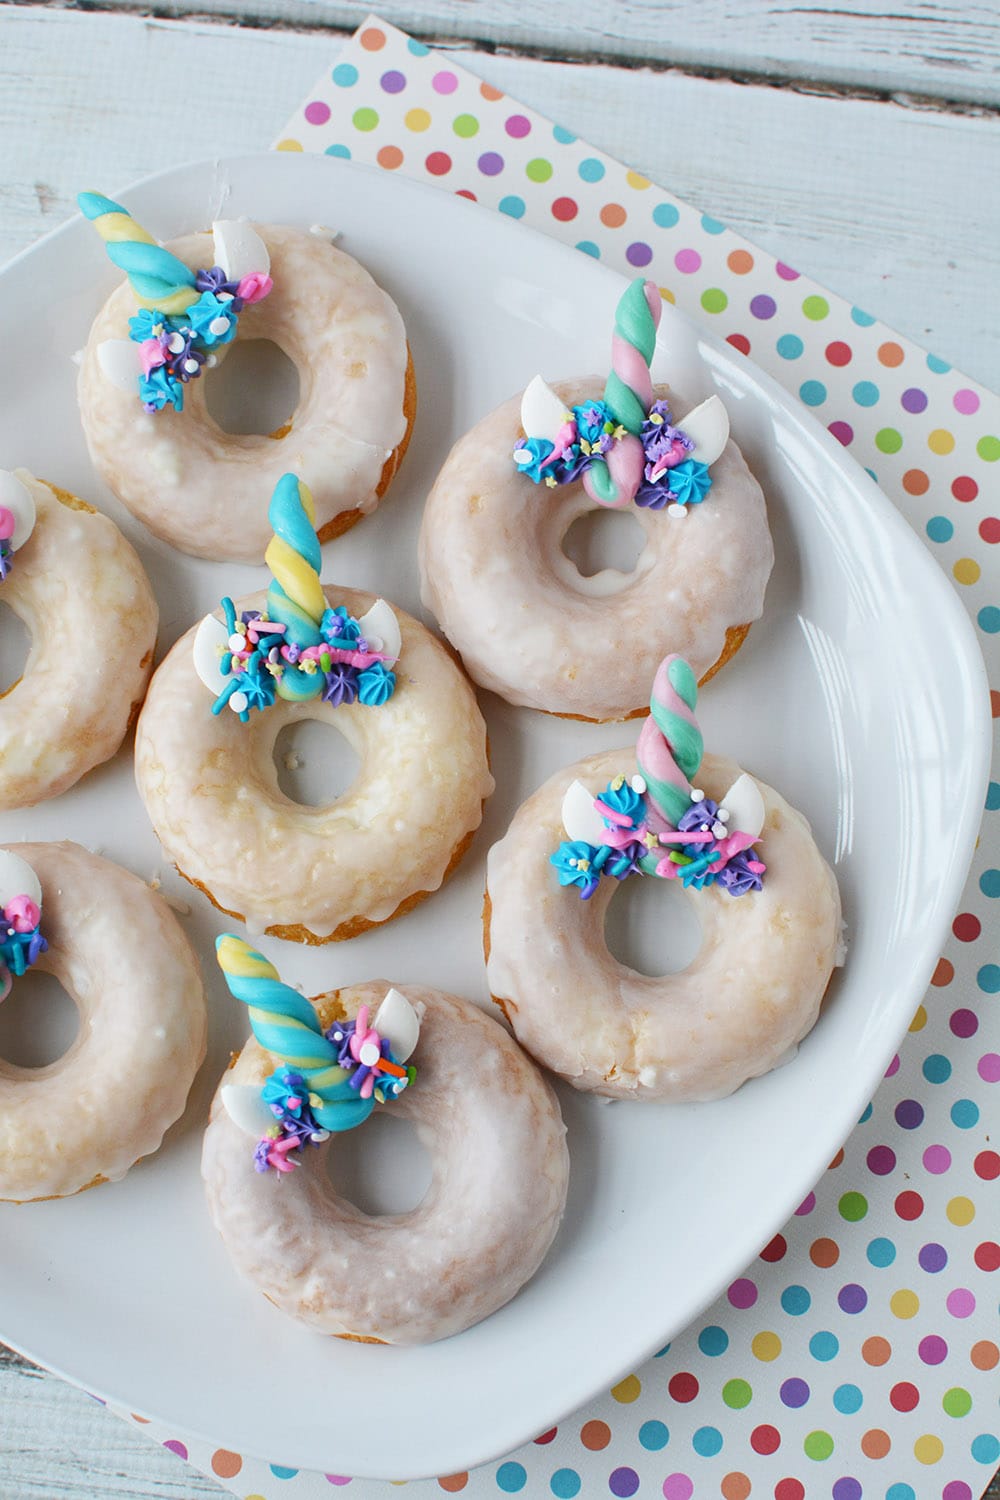 Unicorn donuts on a plate.